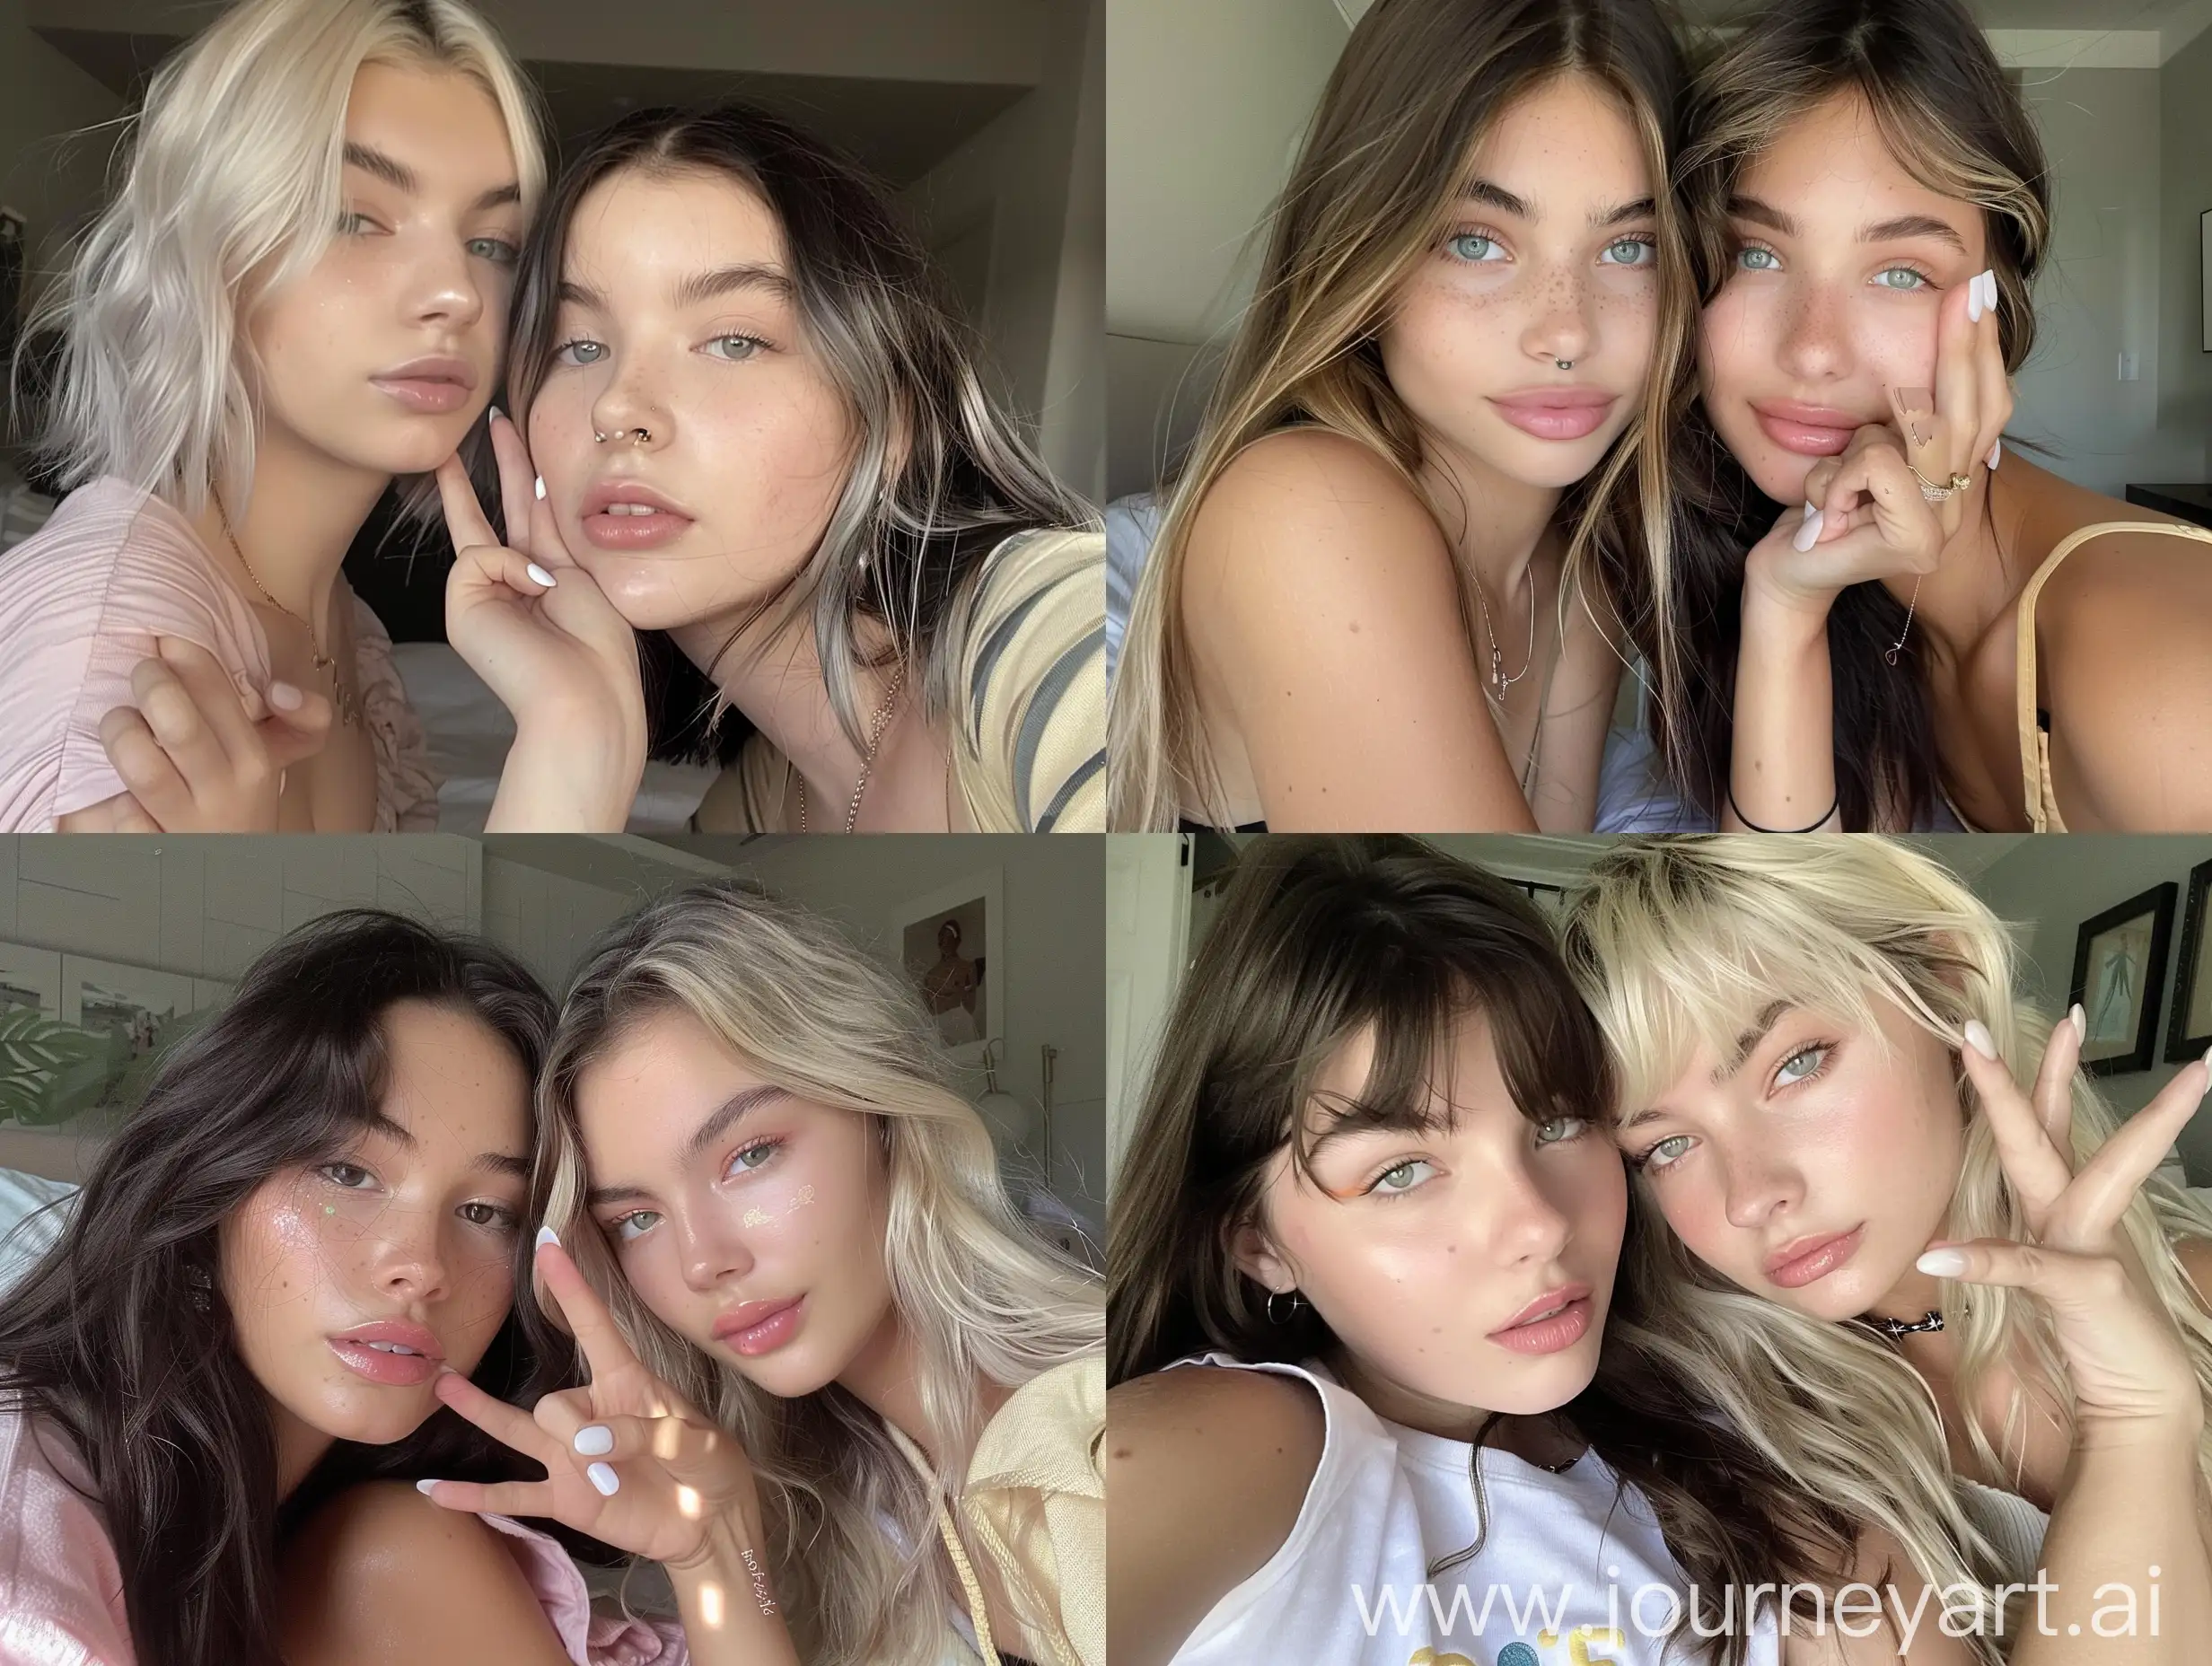 Aesthetic instagram selfie of a teenage girl influencer with her average looking best friend, two girls, one super model, one average looking, different hairstyles, romantic, cute, in bedroom, white gel nail polish, close up selfie